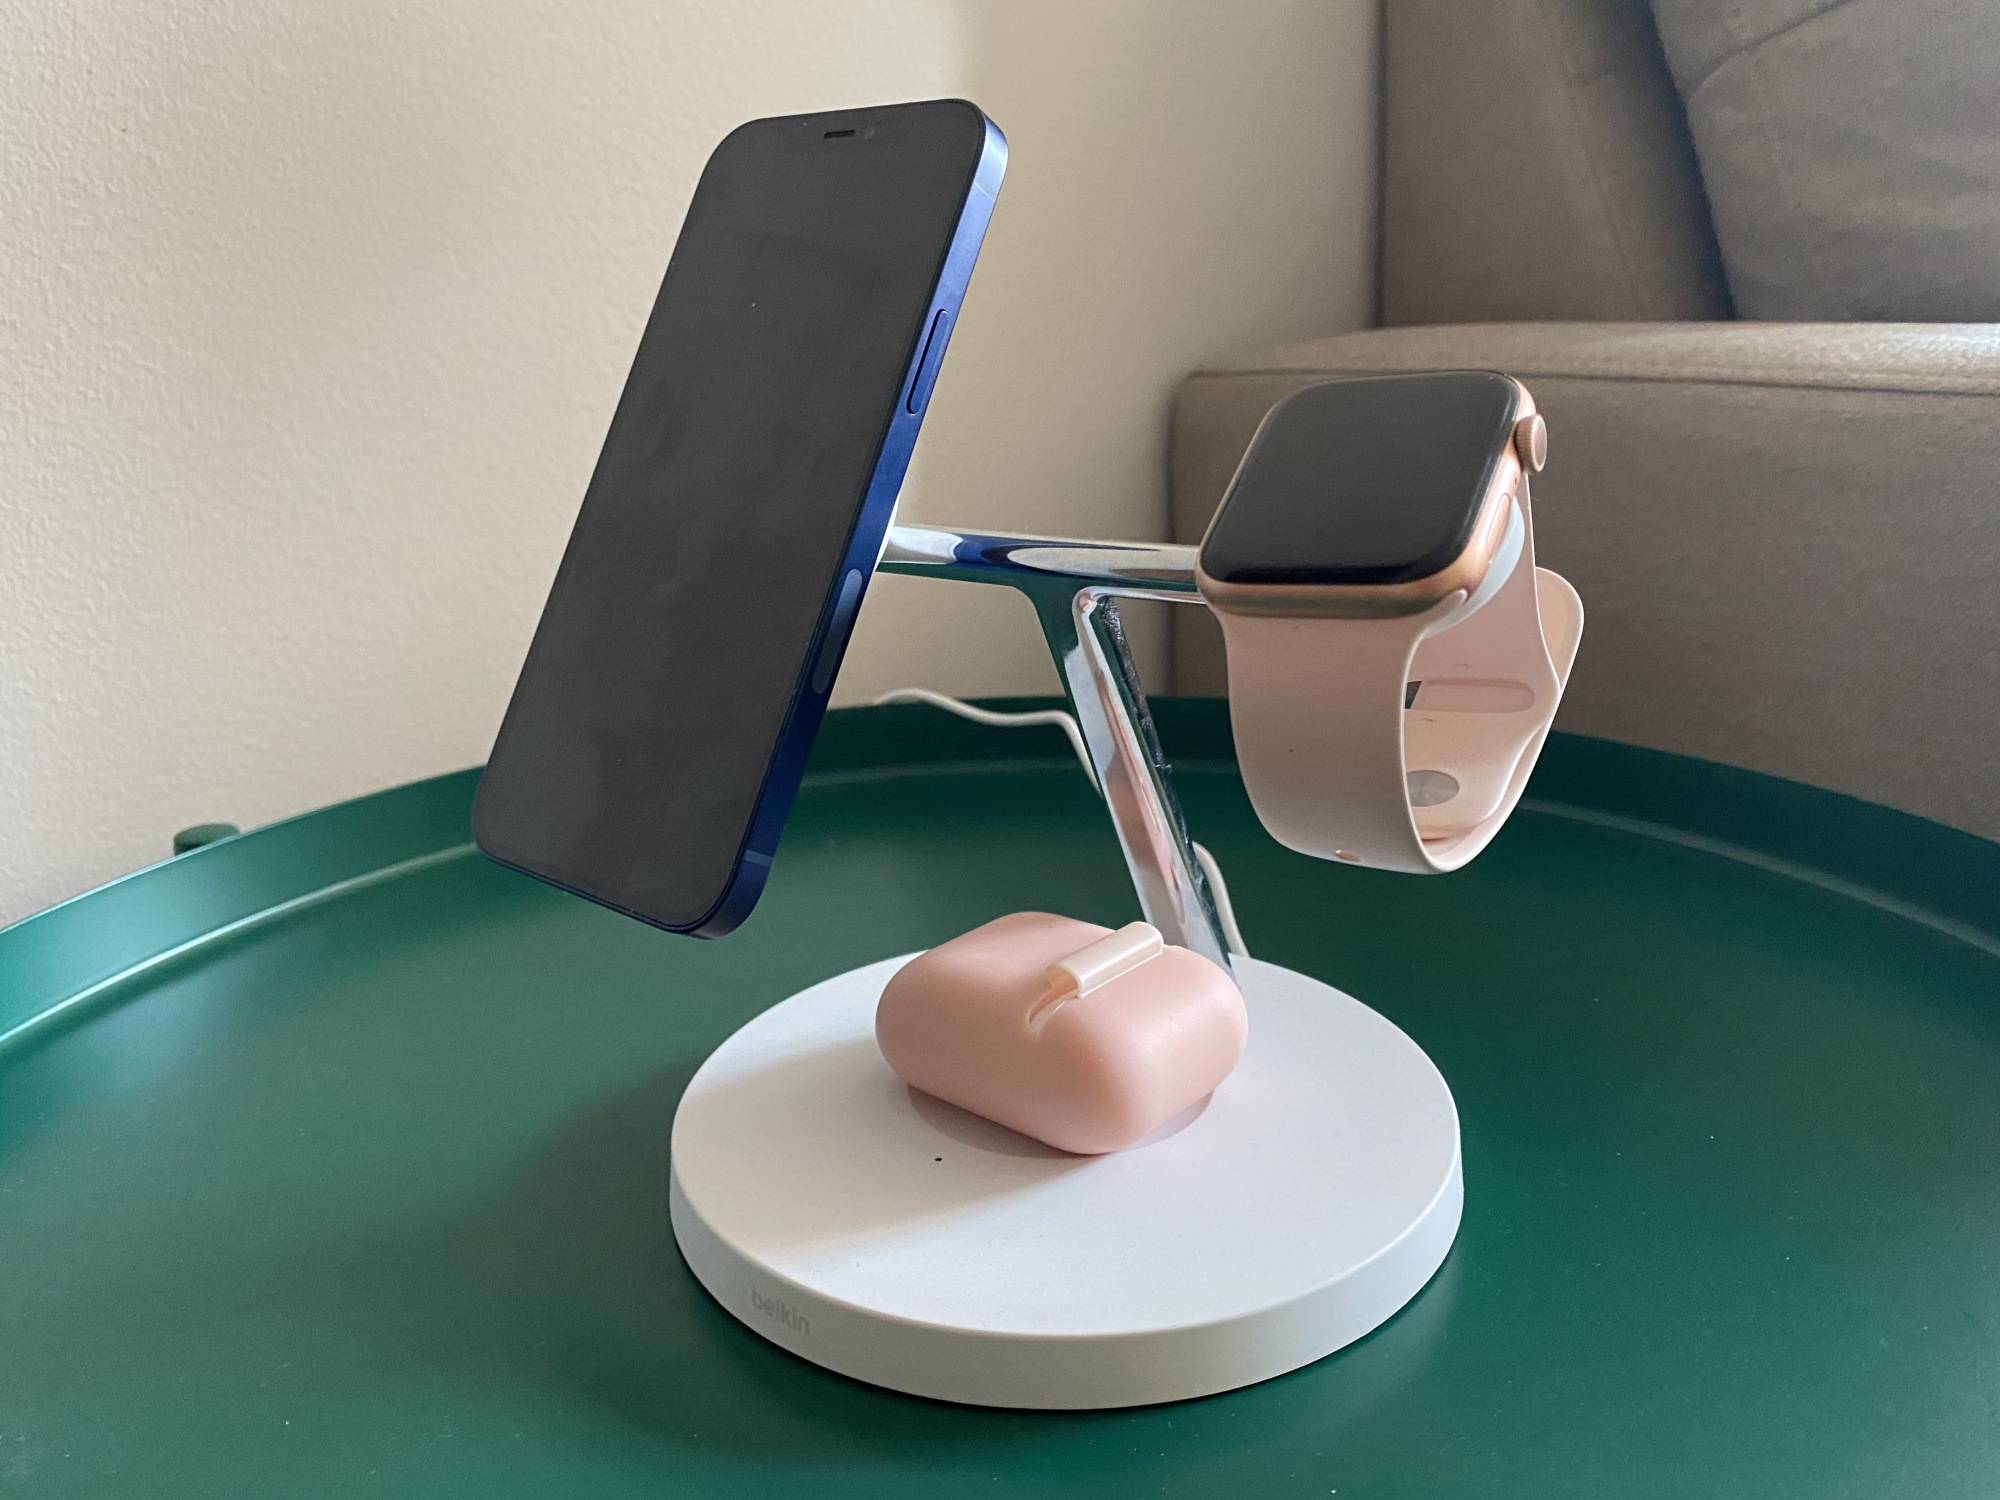 A white 3-in-1 wireless charging stand with an aluminum T-bar design, holding a blue iPhone 12, pink Apple Watch, and AirPods in a pink case.